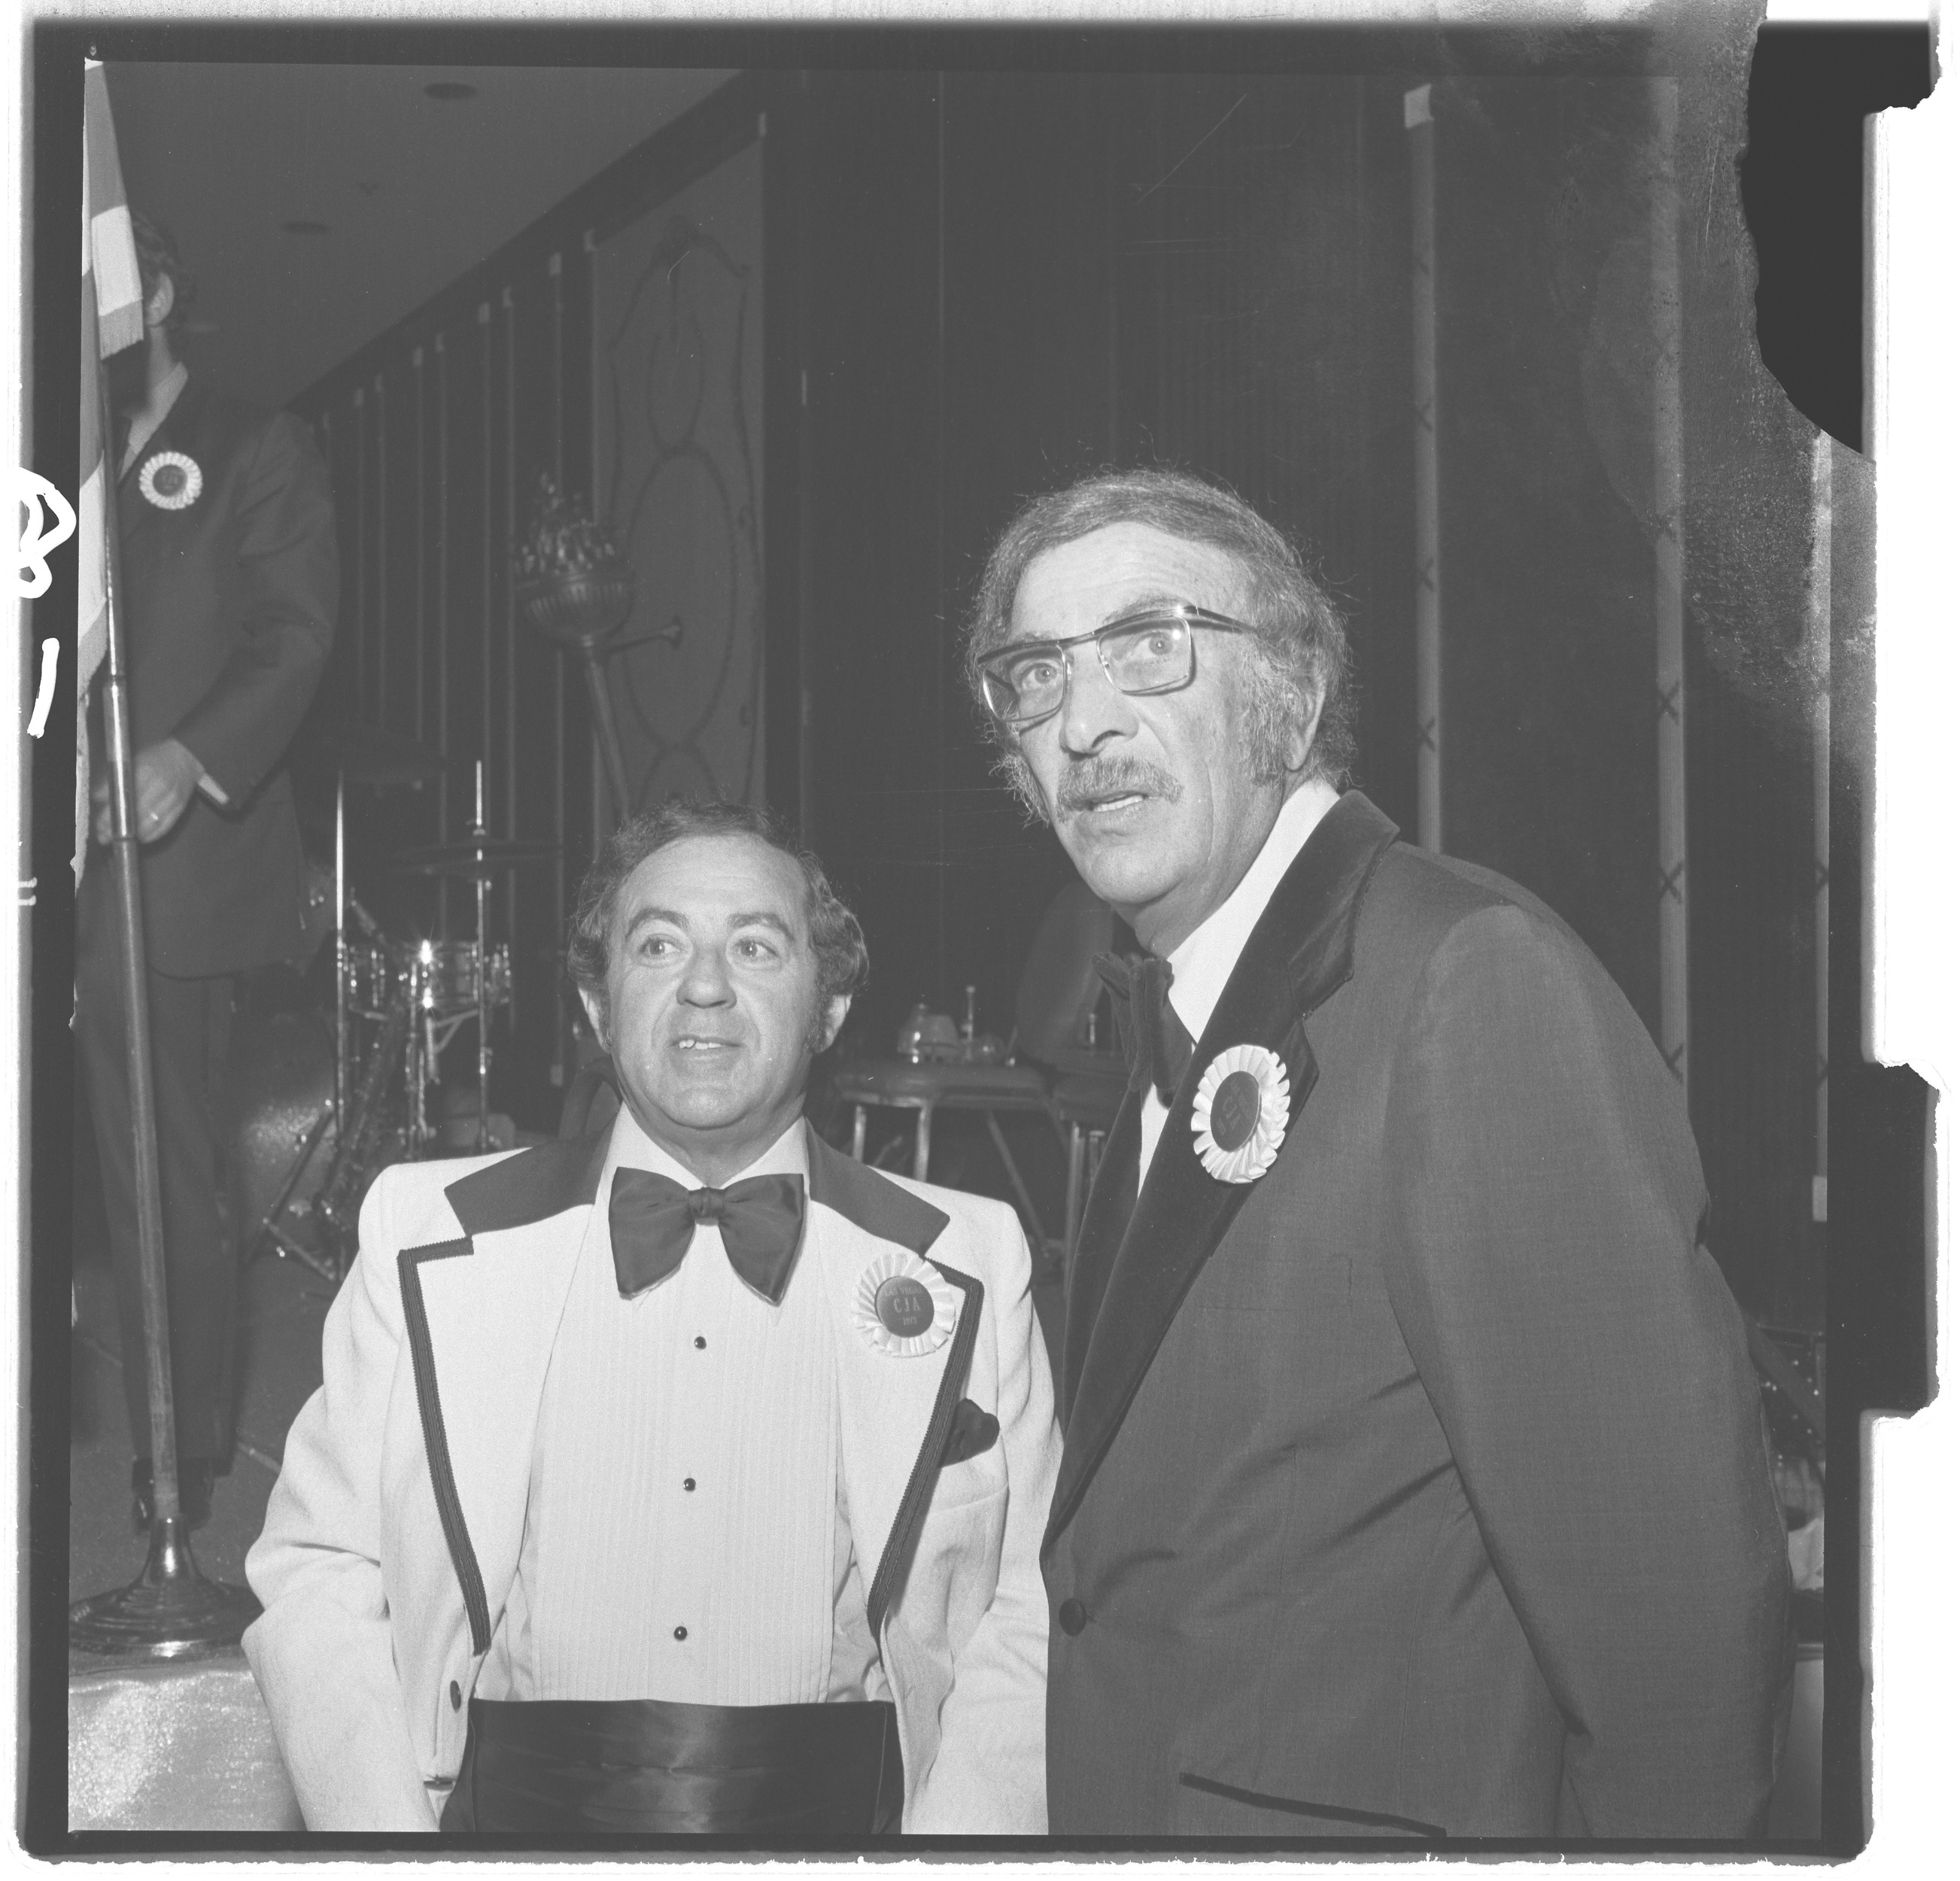 Photographs of Combined Jewish Appeal (Cocktail Party at Caesars Palace, Red Skelton), image 11